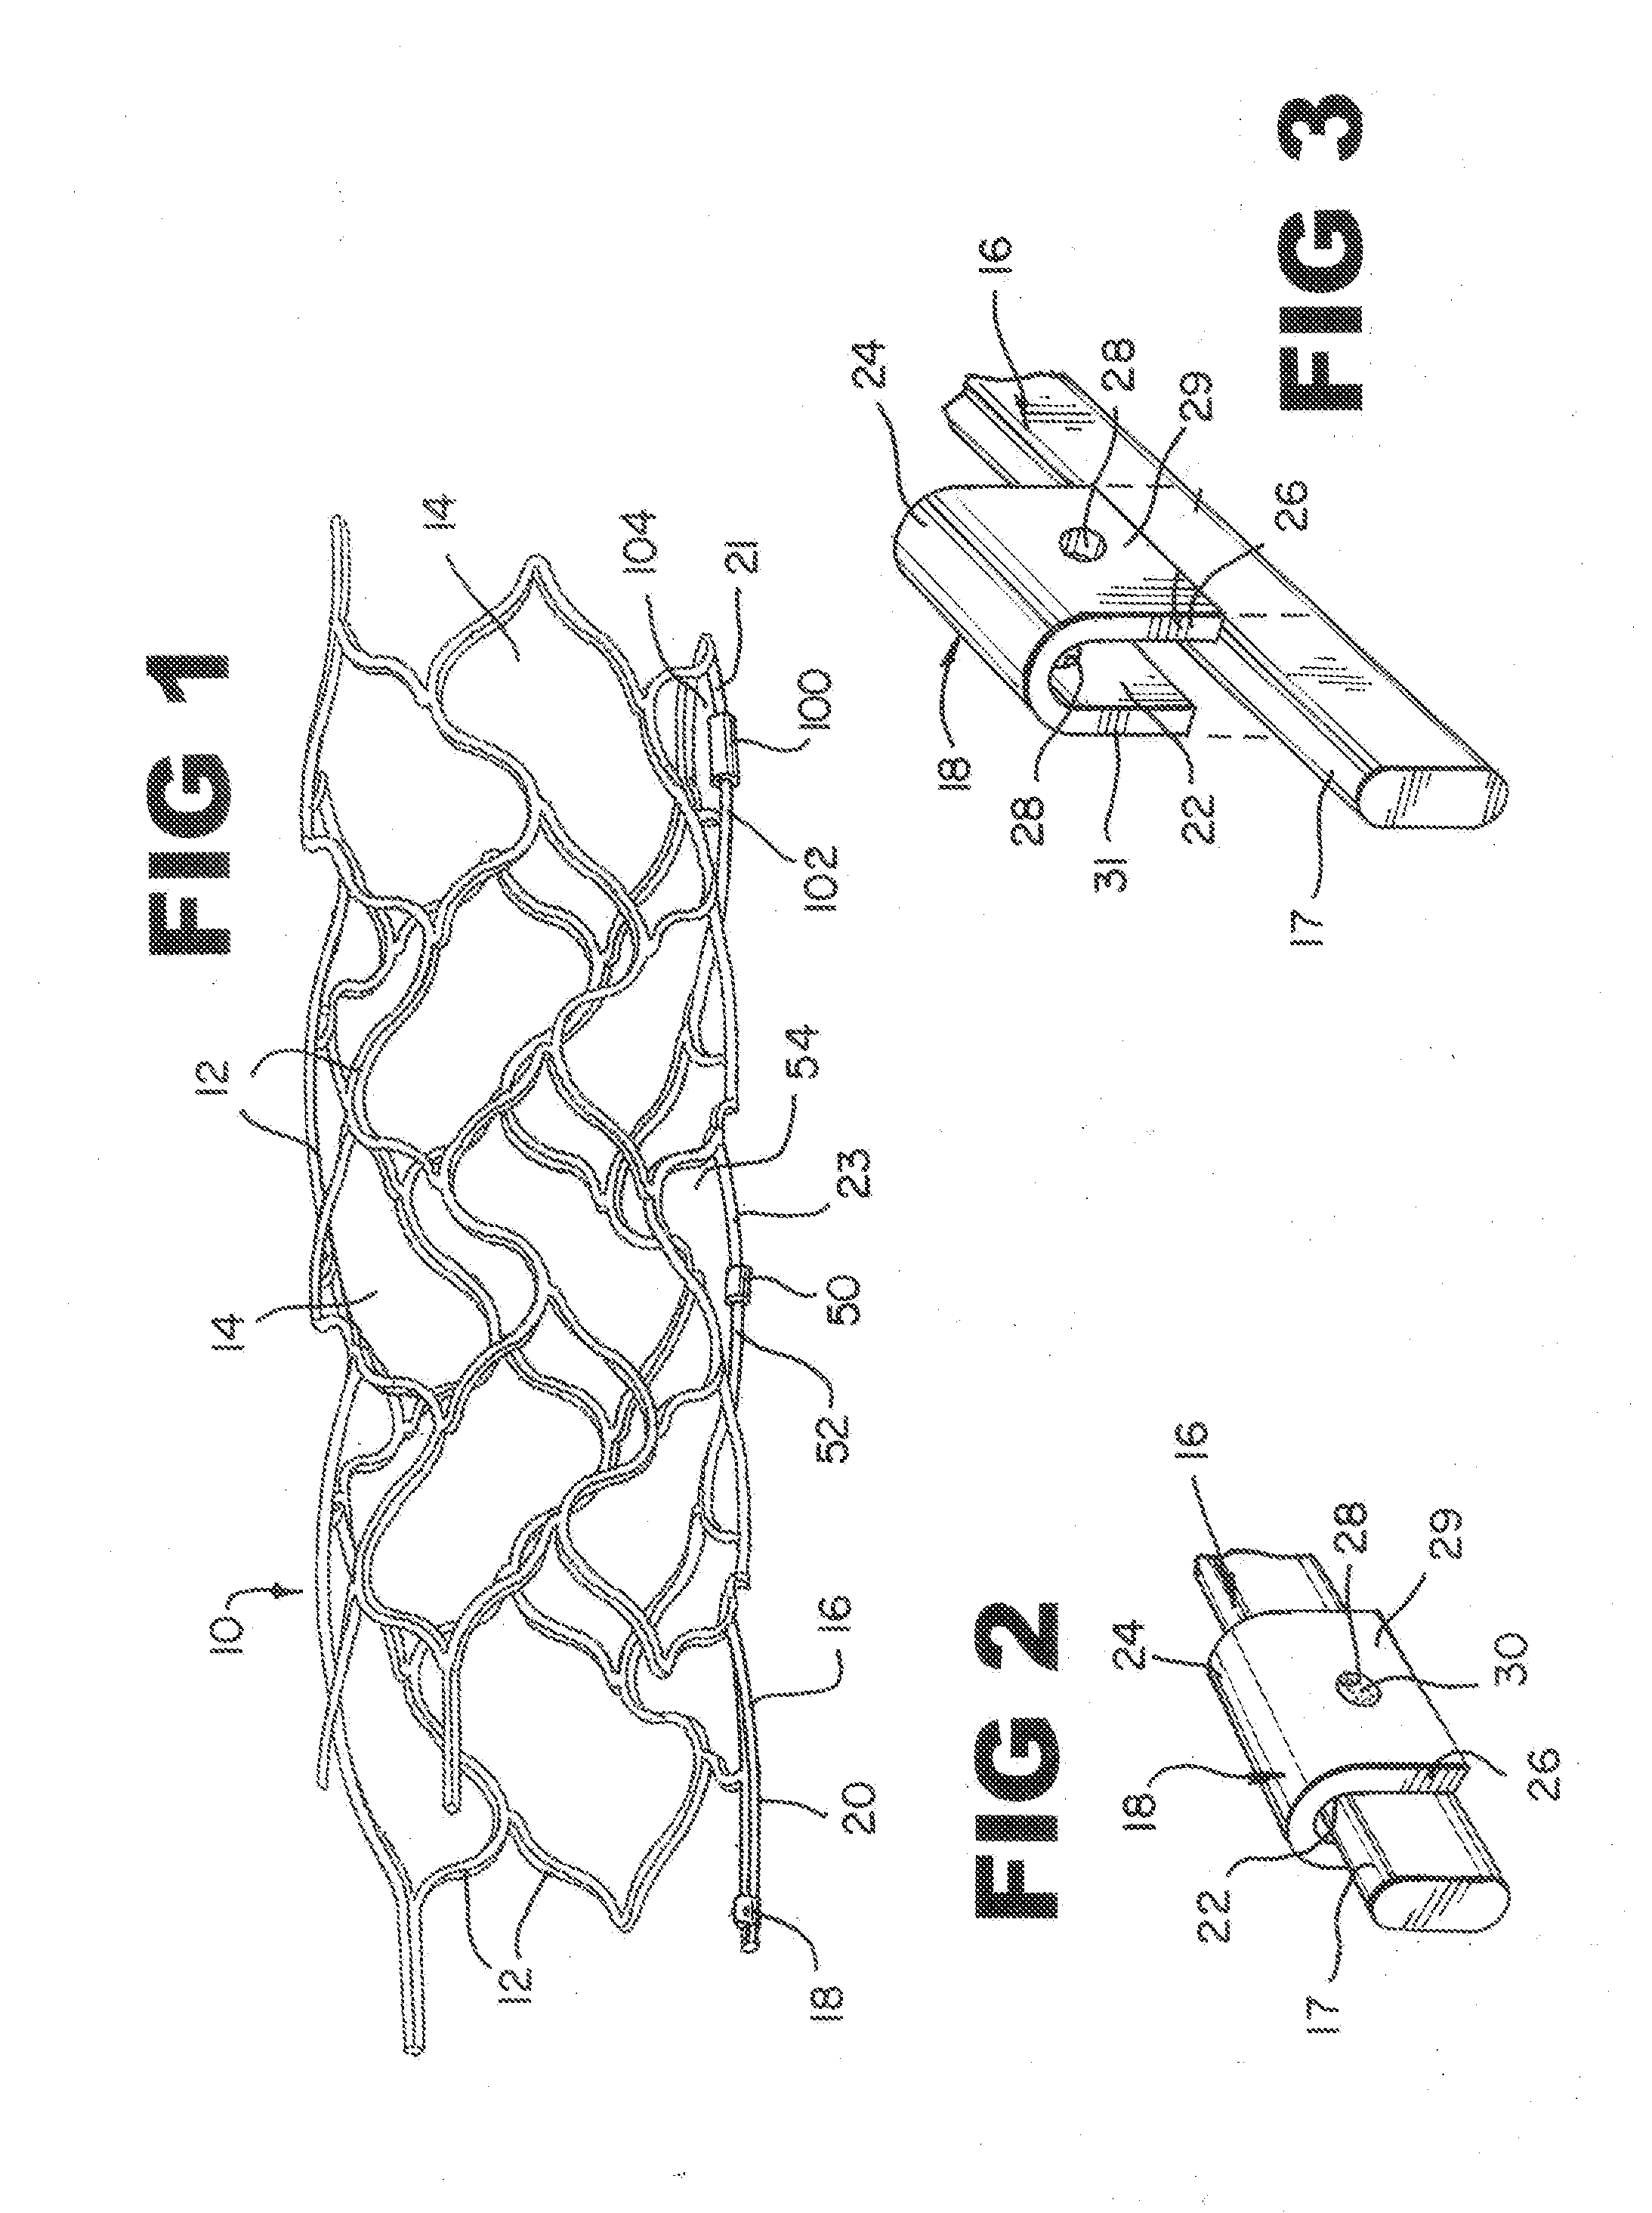 Radiopaque marker for vascular devices